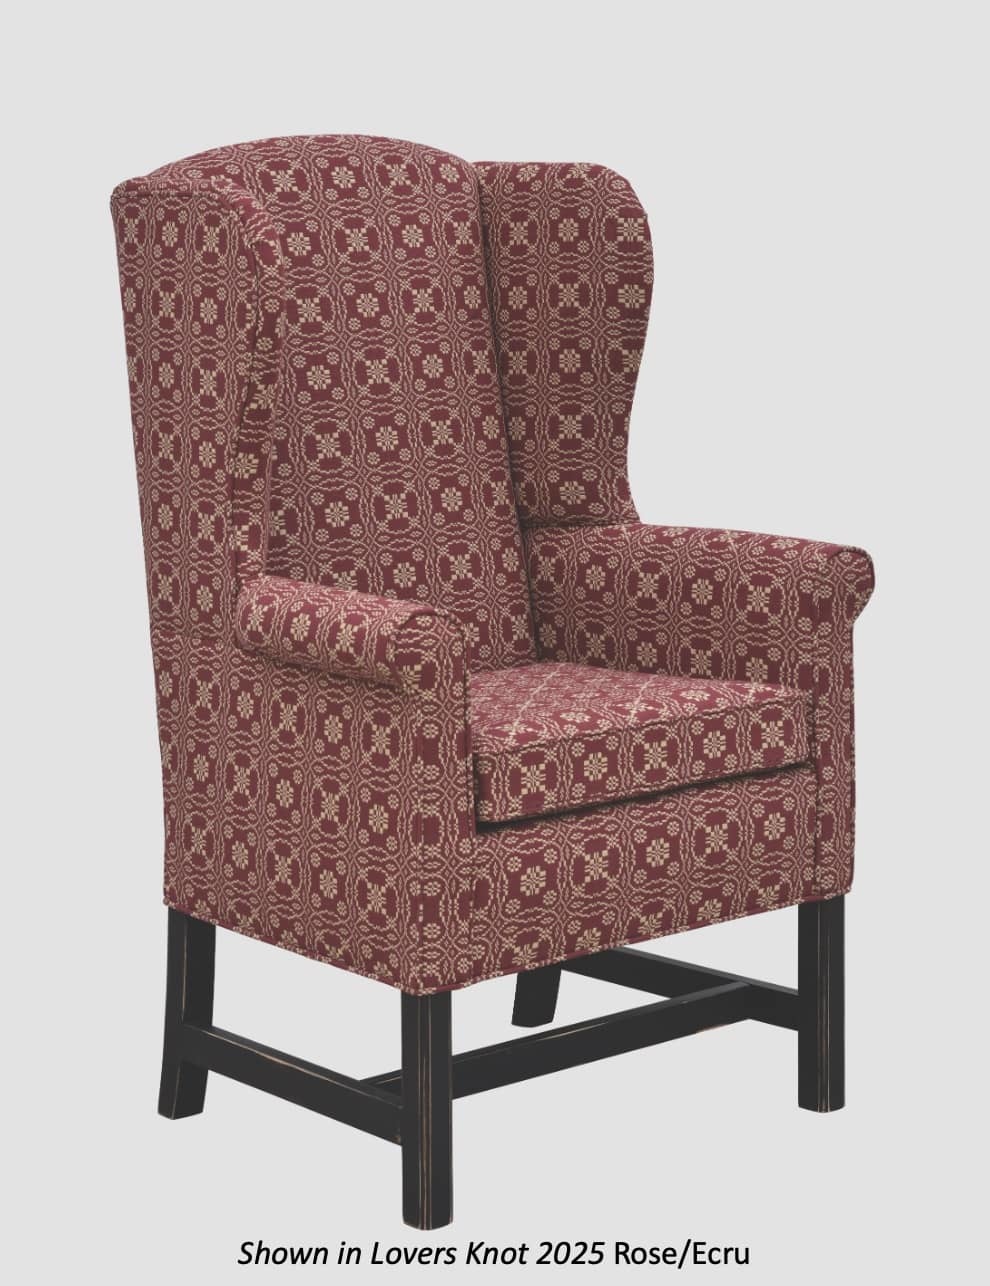 Town & Country Furnishings Library Wing Chair from the American Primitive Collection Brand: Town & Country Furnishings